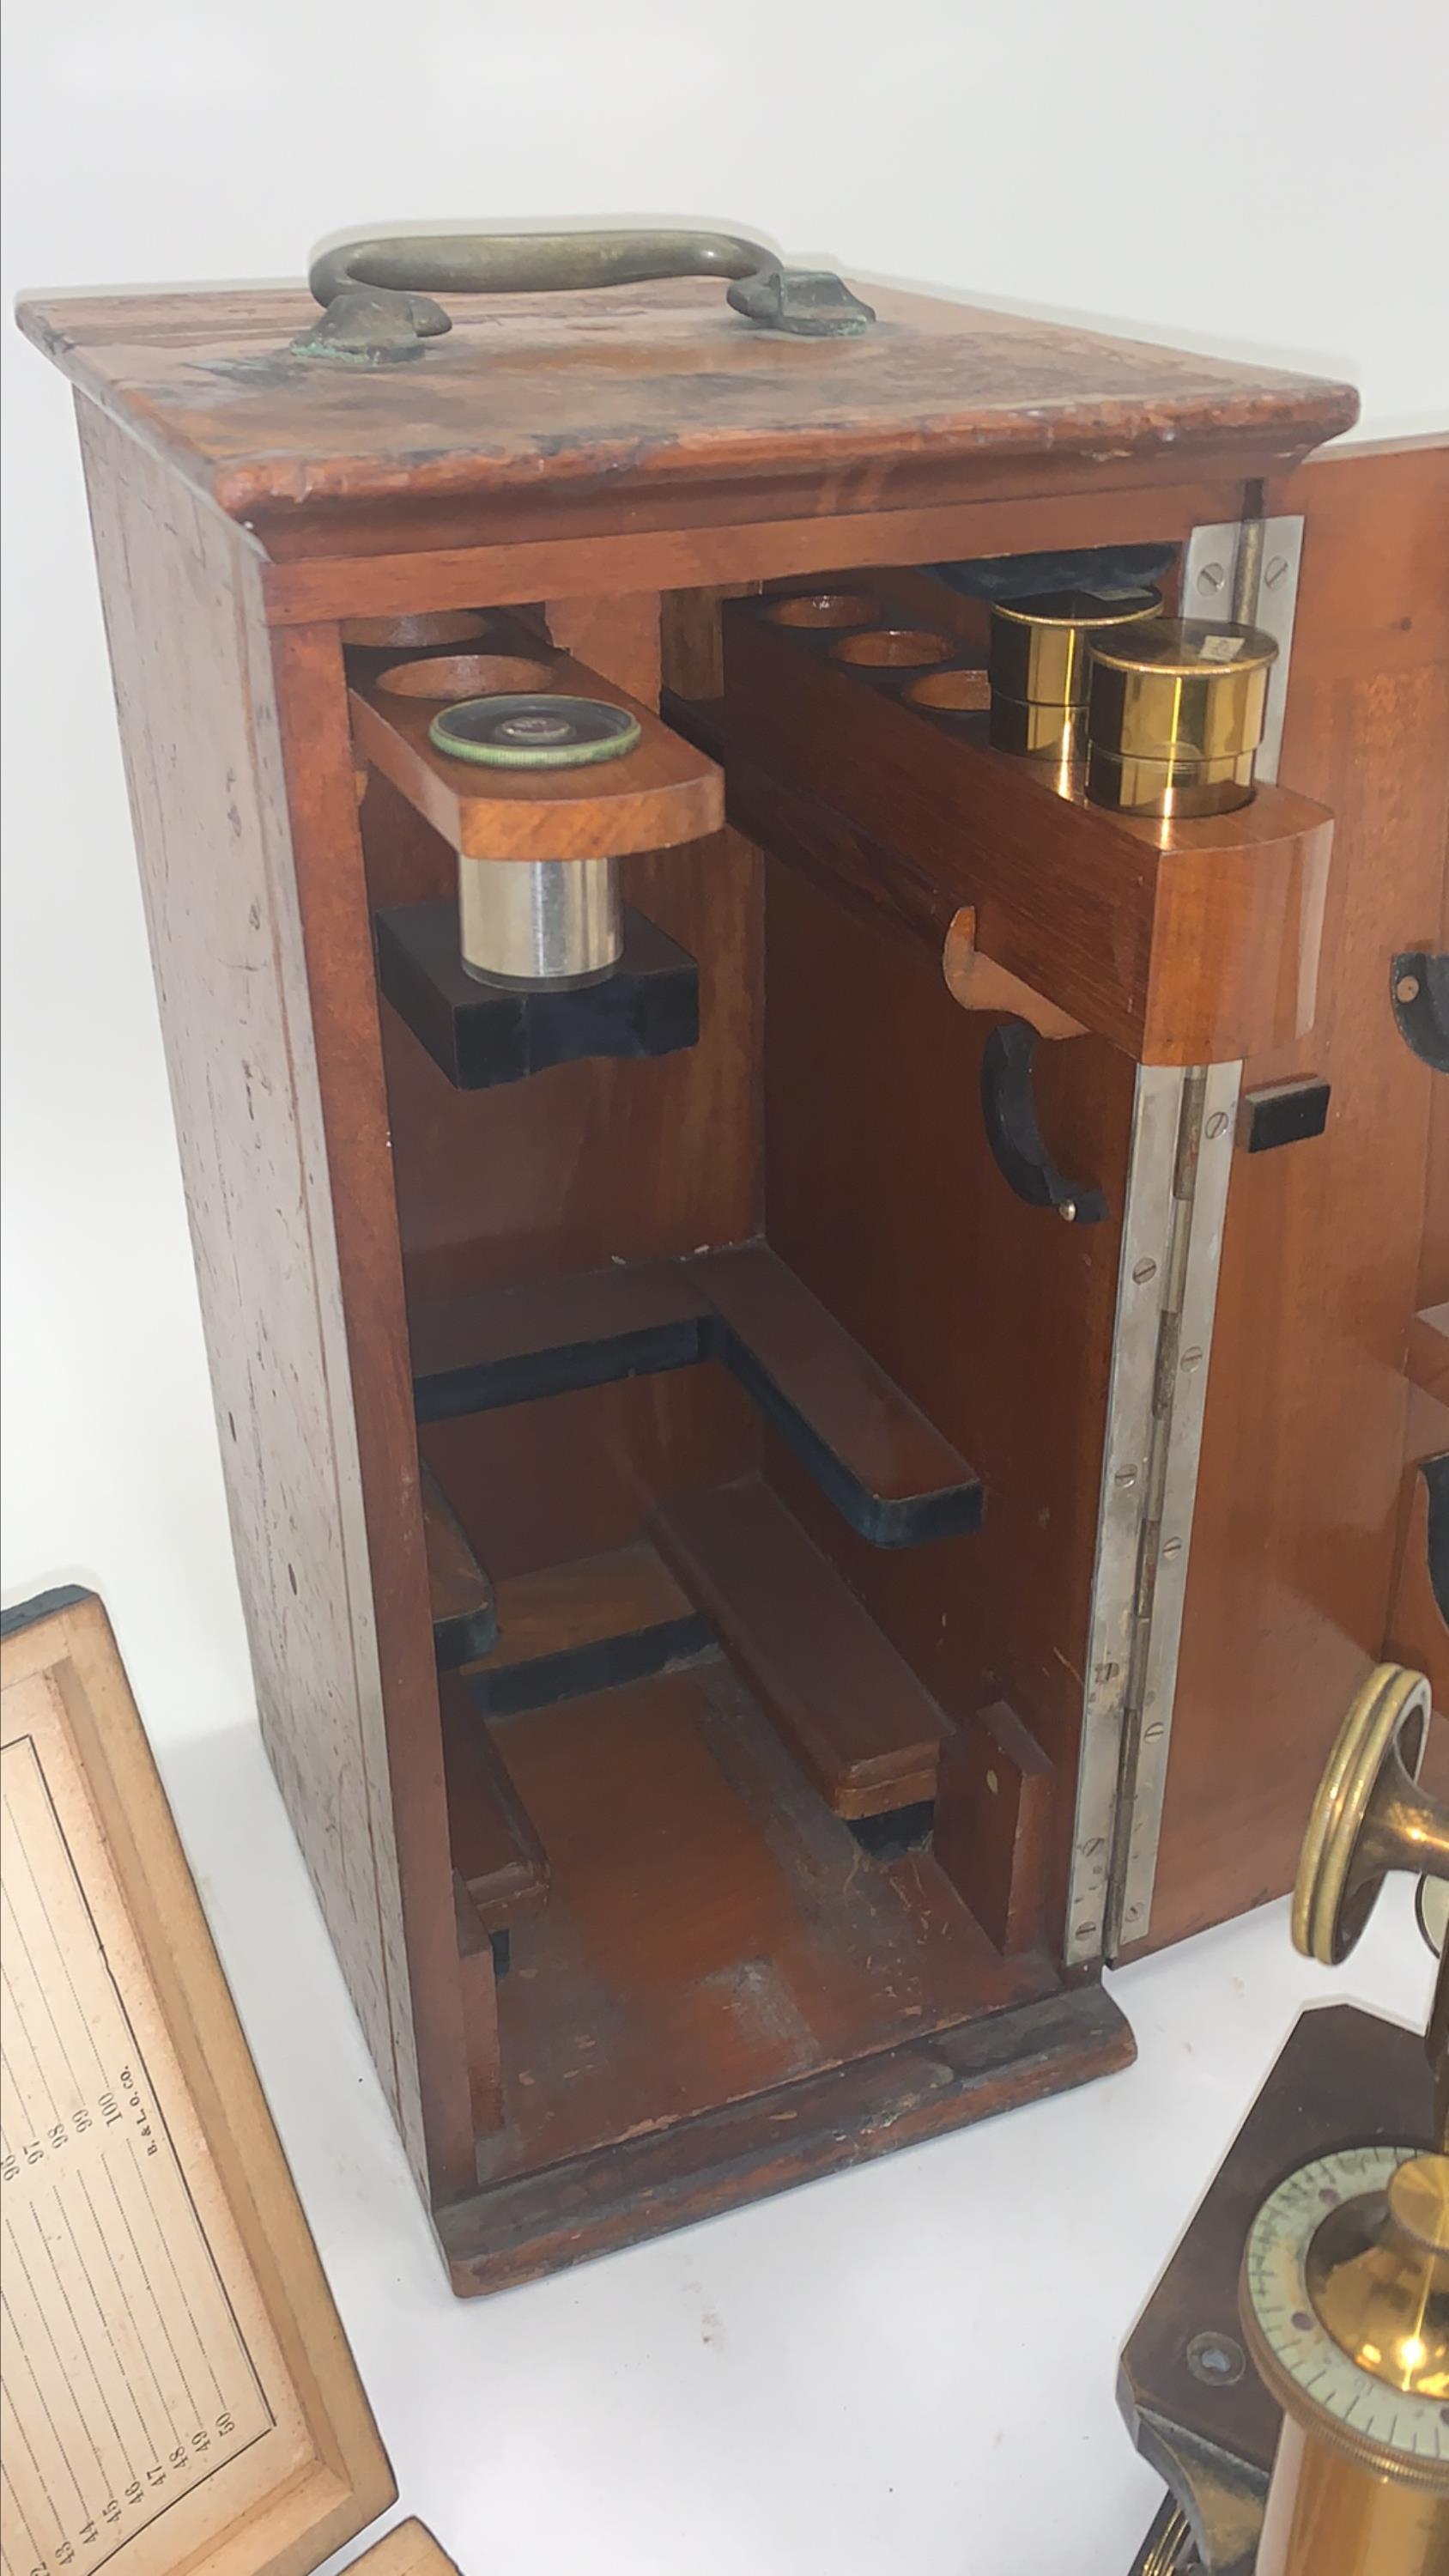 Carl Zeiss Stand IV Brass Continental Microscope W/ Case and Slides, circa 1891 In Good Condition For Sale In Norwalk, CT